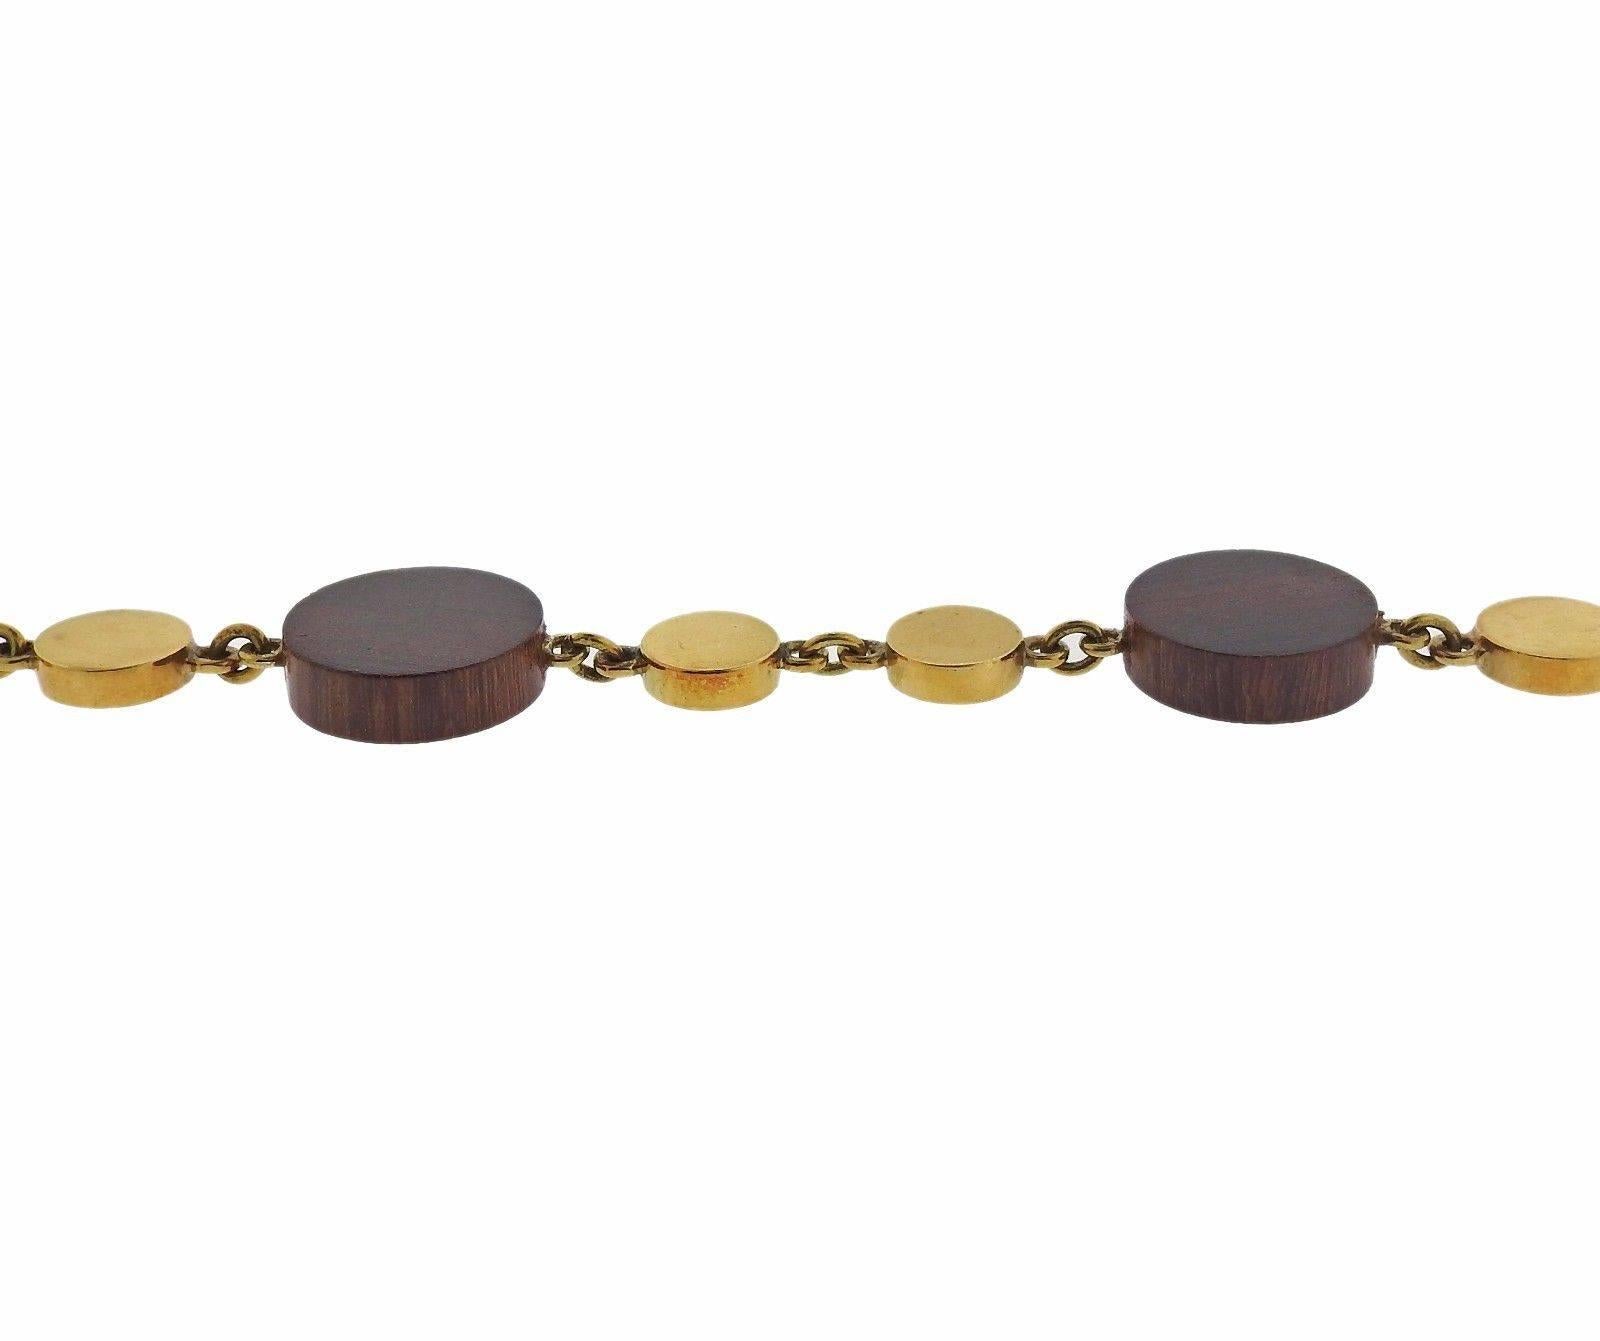 An 18k yellow gold bracelet with ebony wood stations.  The bracelet measures 7 1/2" long and the ebony circles are 18mm in diameter. The weight of the piece is 14.8 grams. Marked: 750.